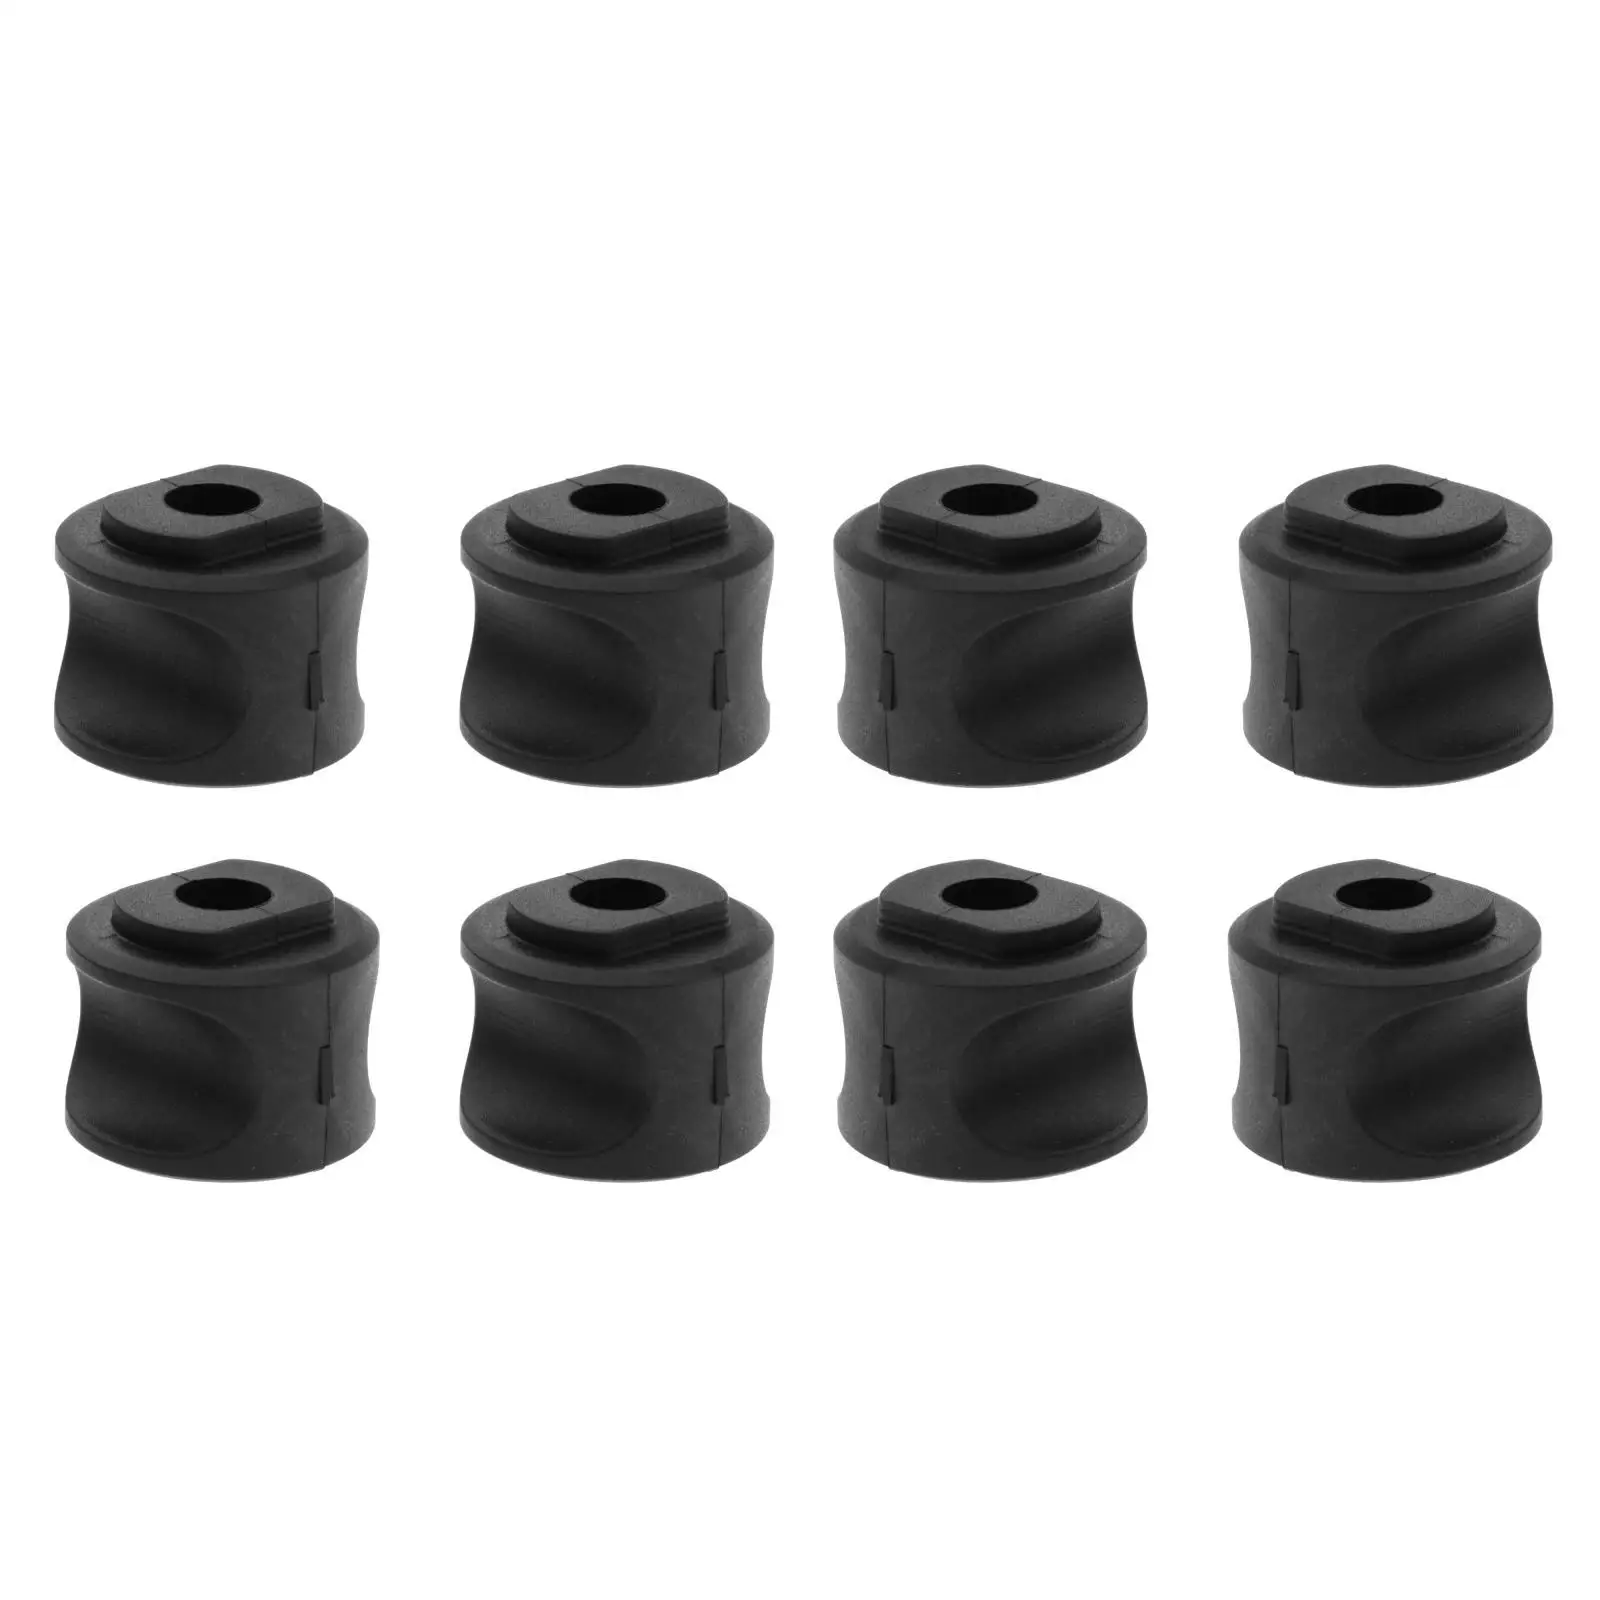 8 Pieces Black Rear Stabilizer Support Bushing for 97 05 Sportsman 500